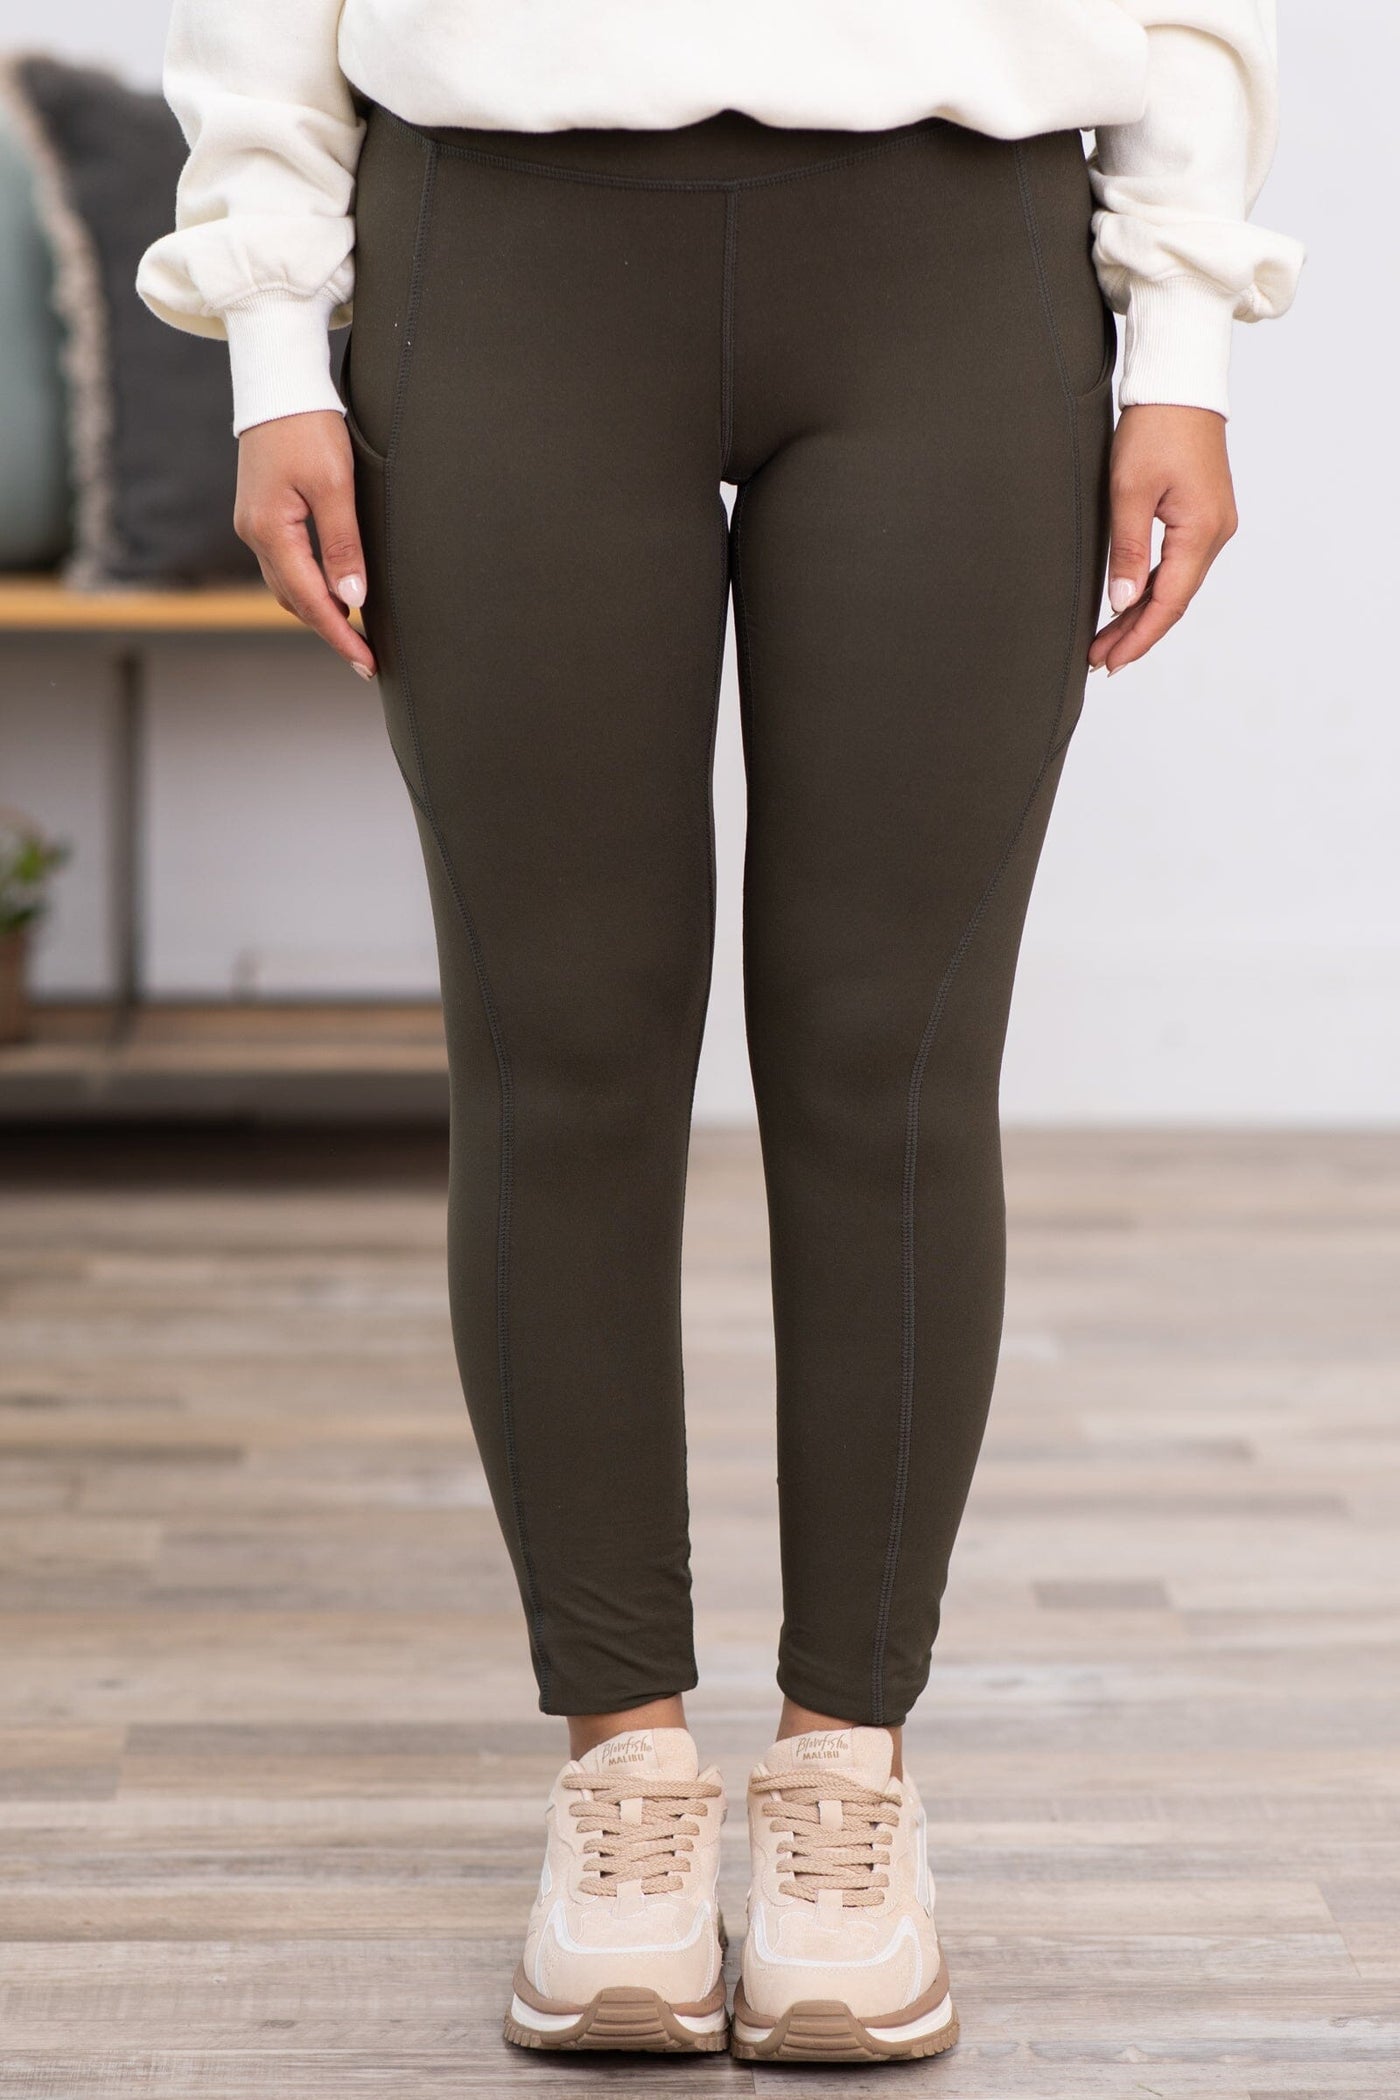 Olive Buttery Soft Leggings With Side Pocket - Filly Flair